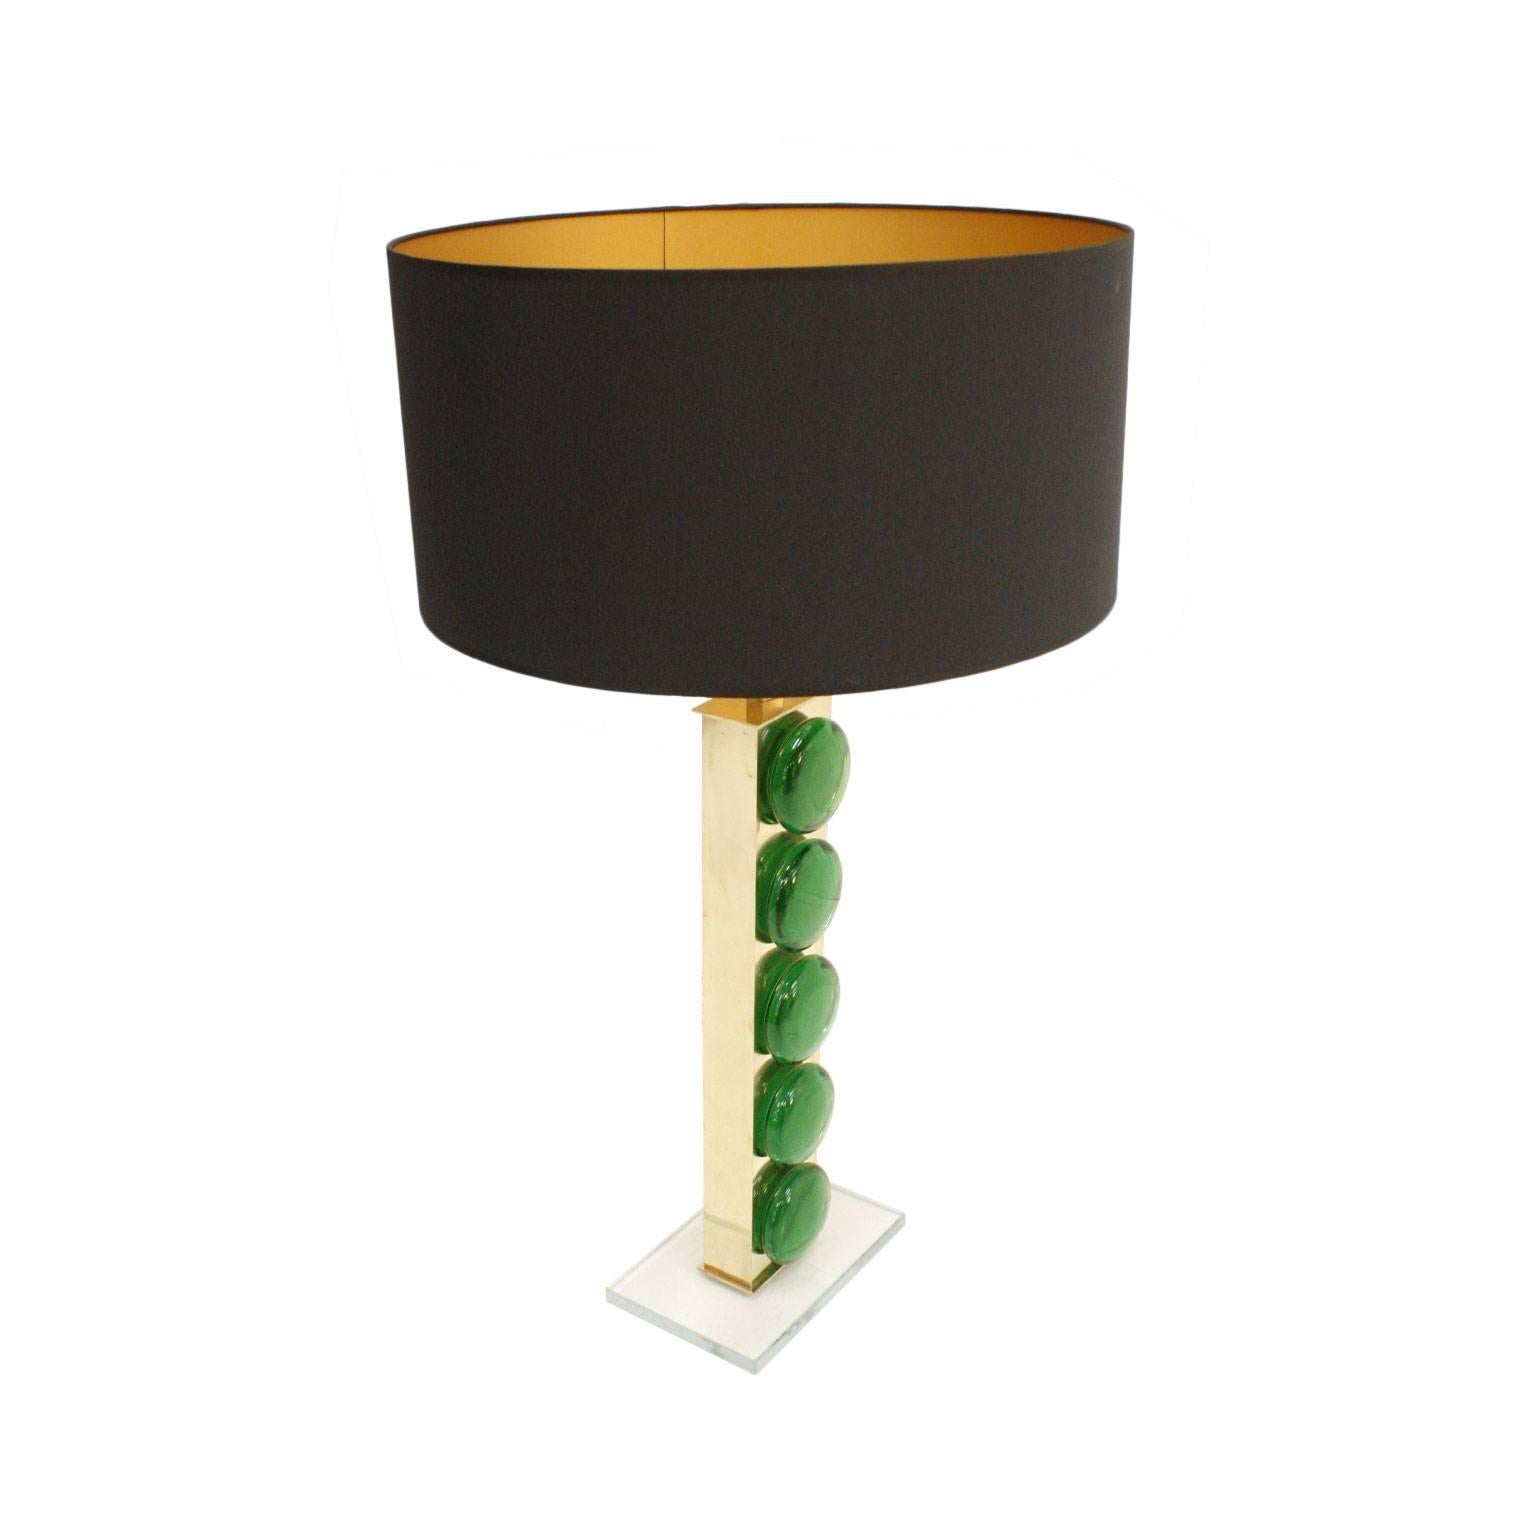 Midcentury style pair of Italian table lamps with brass structure and green murano glass pieces. Circular screens in black velvet.

This mid-century modern style table lamp showcases a beautiful blend of elegance and retro charm. Its brass structure